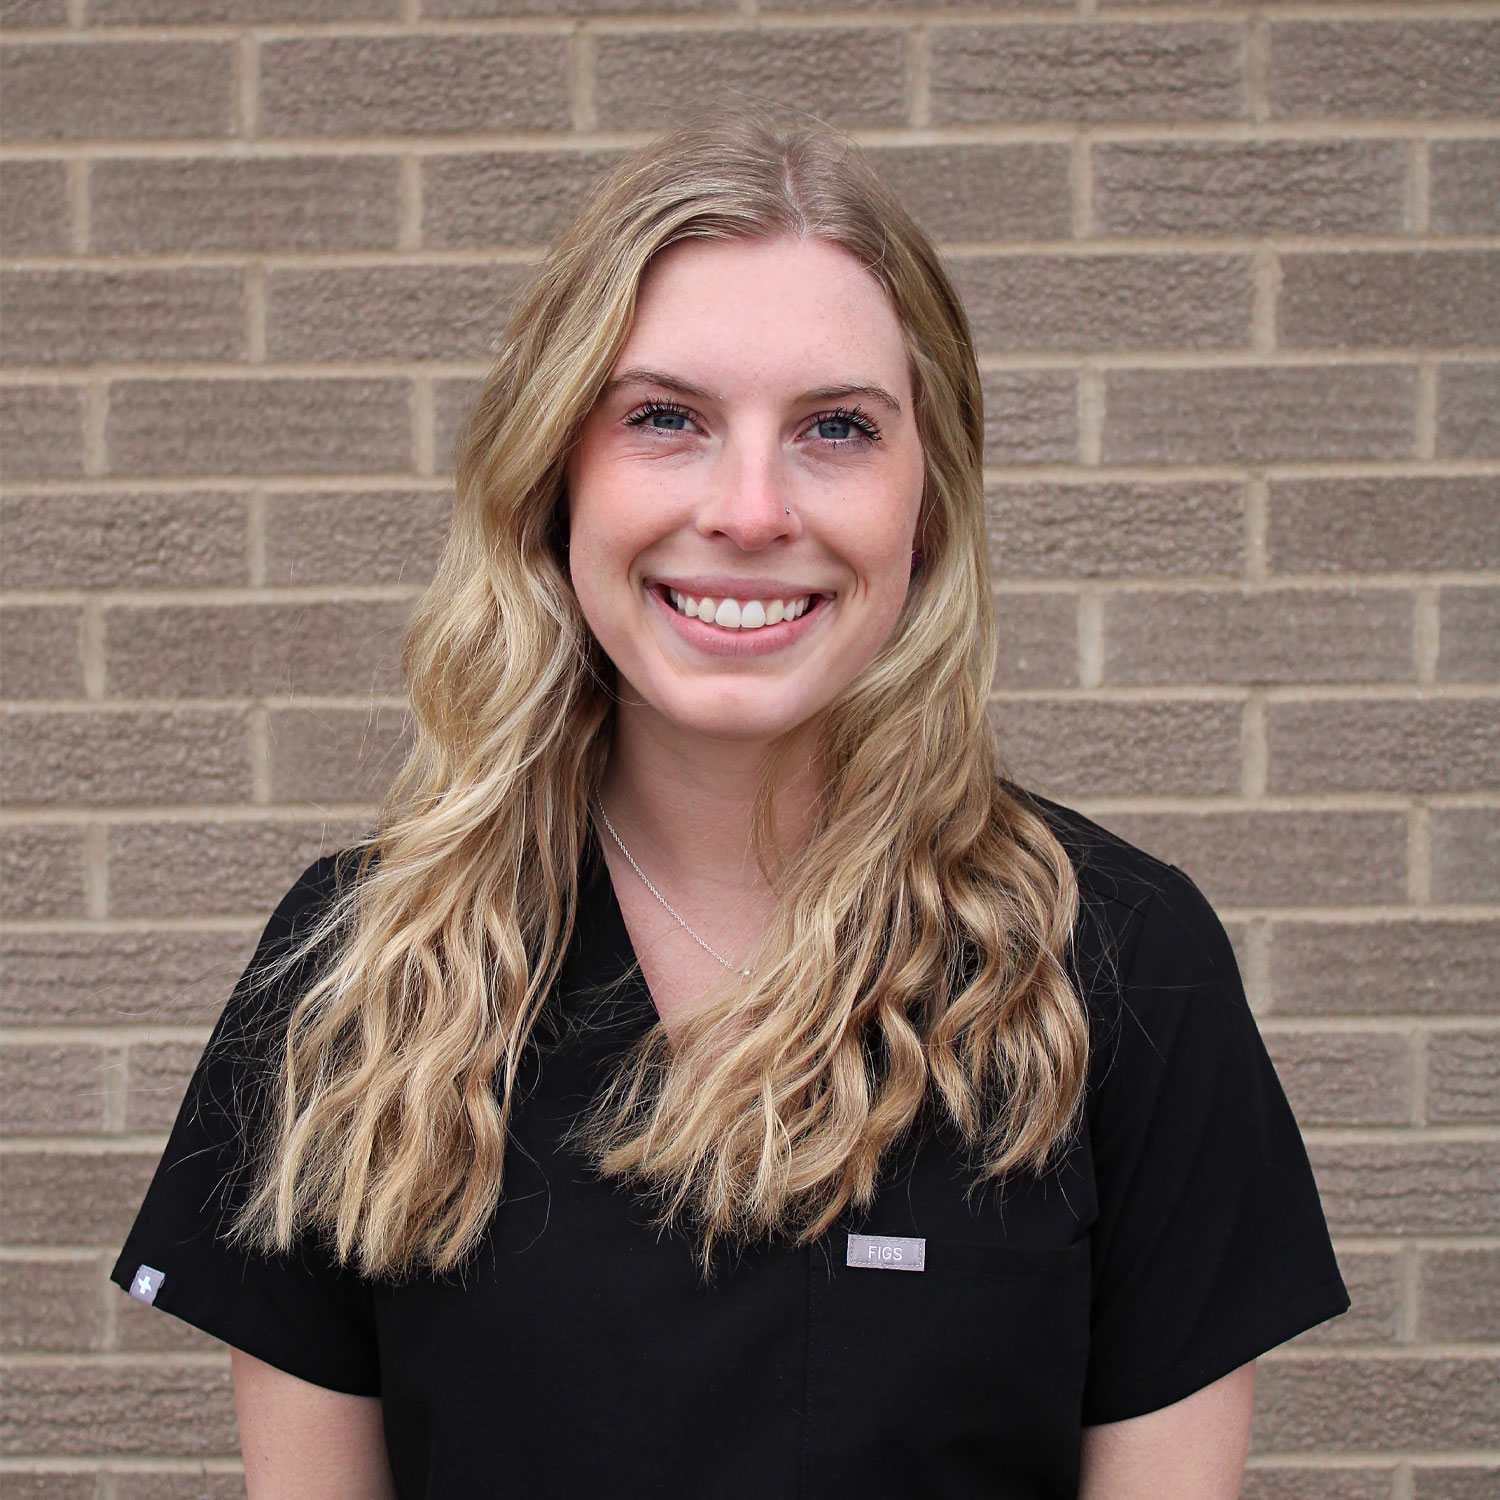 Kaelee, laser liaison at Squires Chiropractic in Ludington